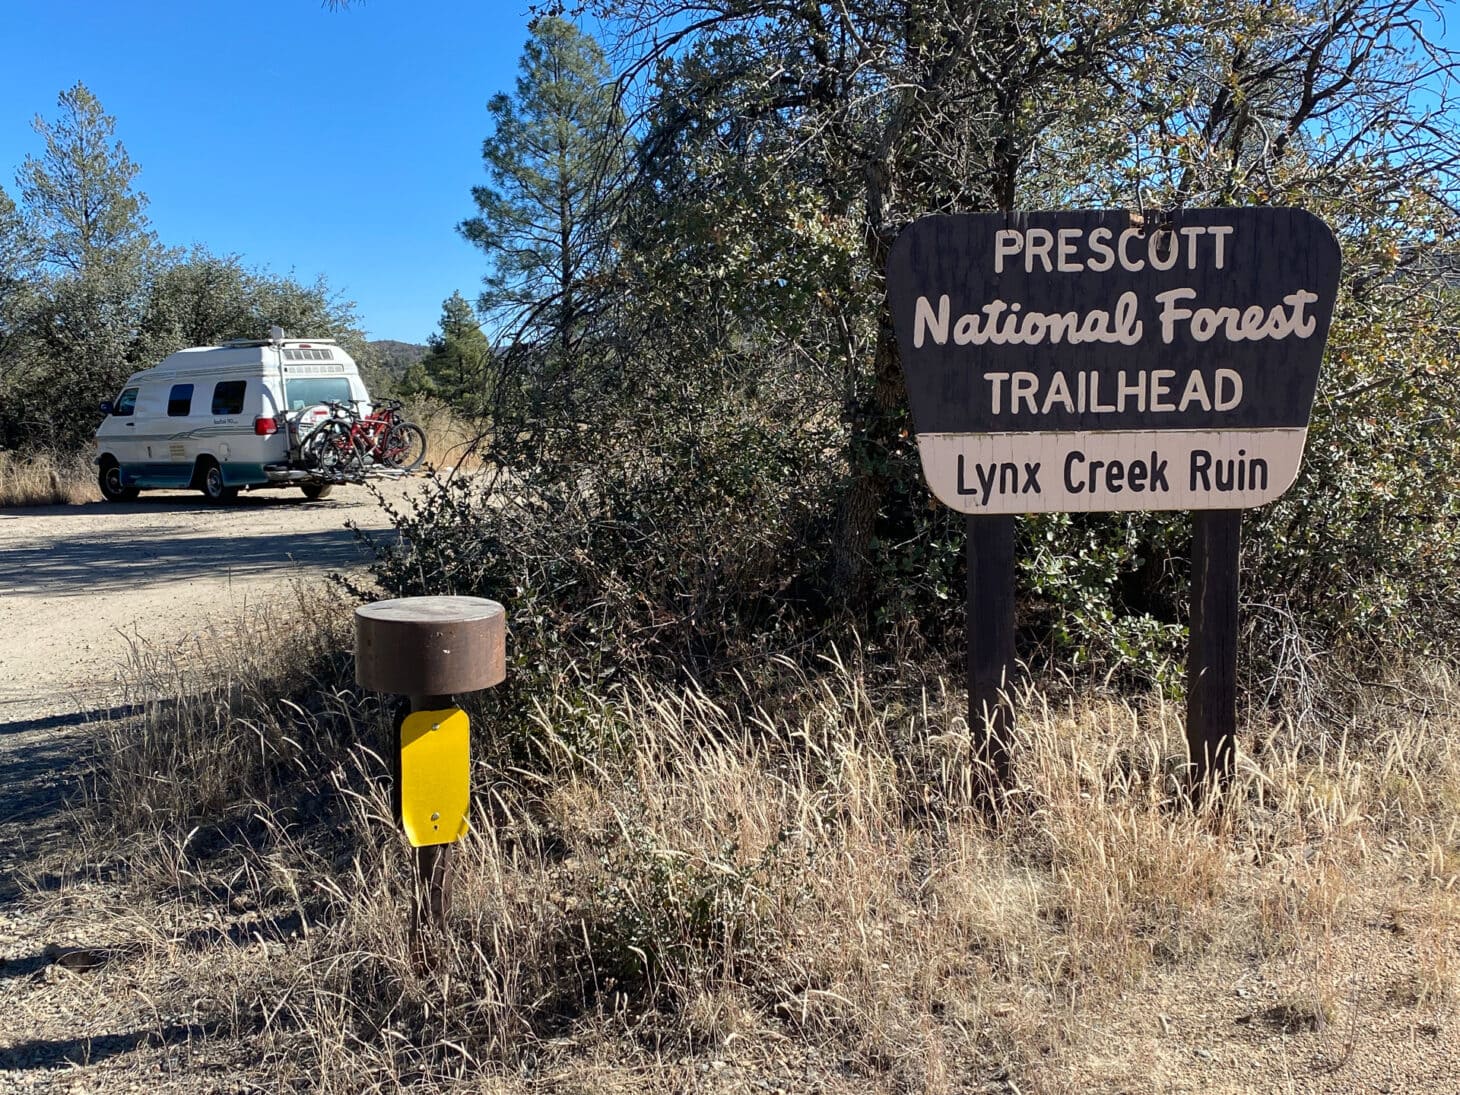 How to Visit Prescott National Forest by RV and Where to Camp